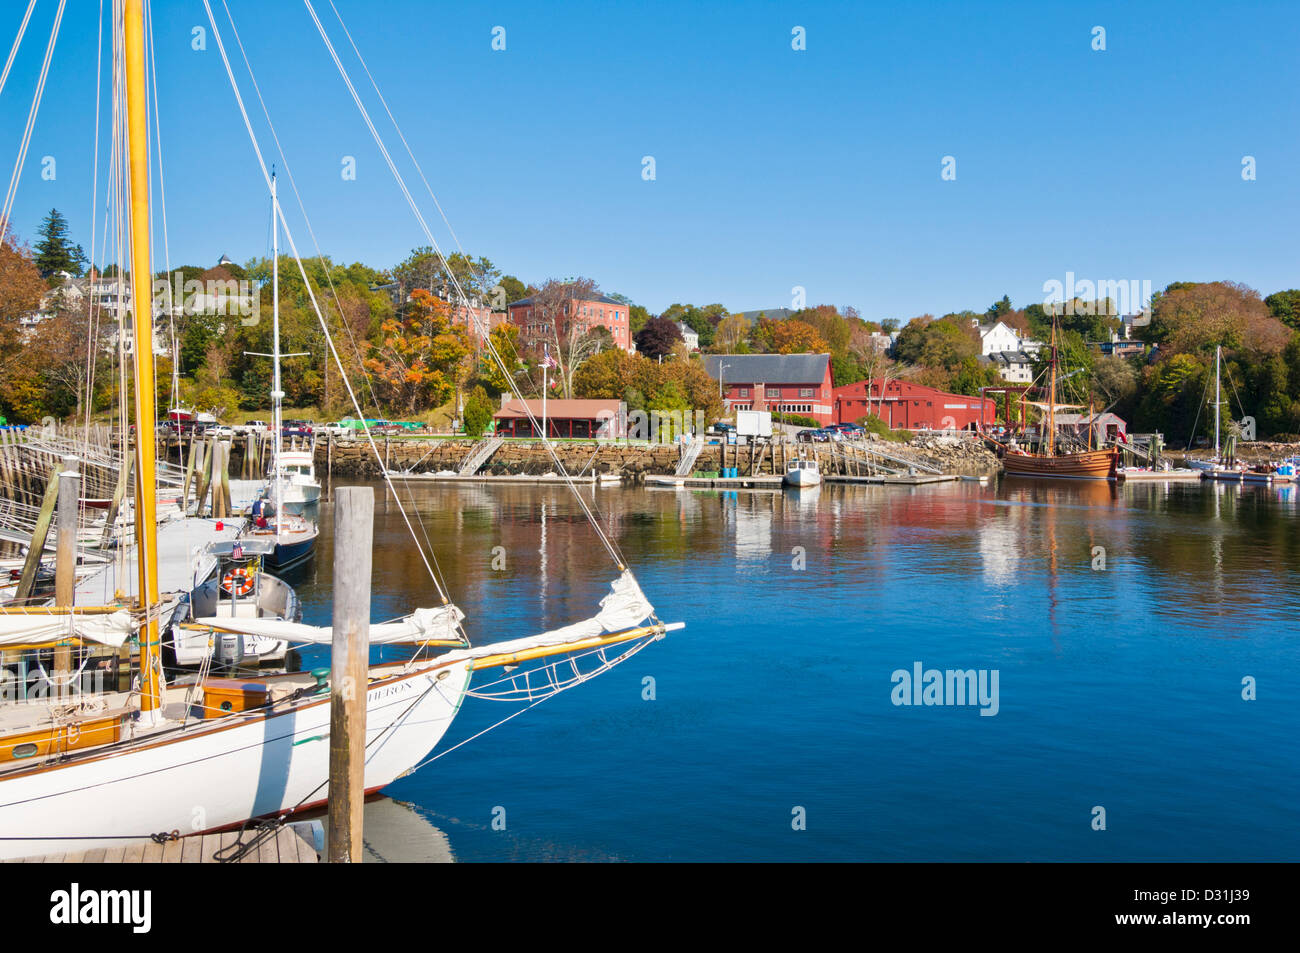 Yachts moored in Rockport harbour harbor Maine New England USA United States of America Stock Photo